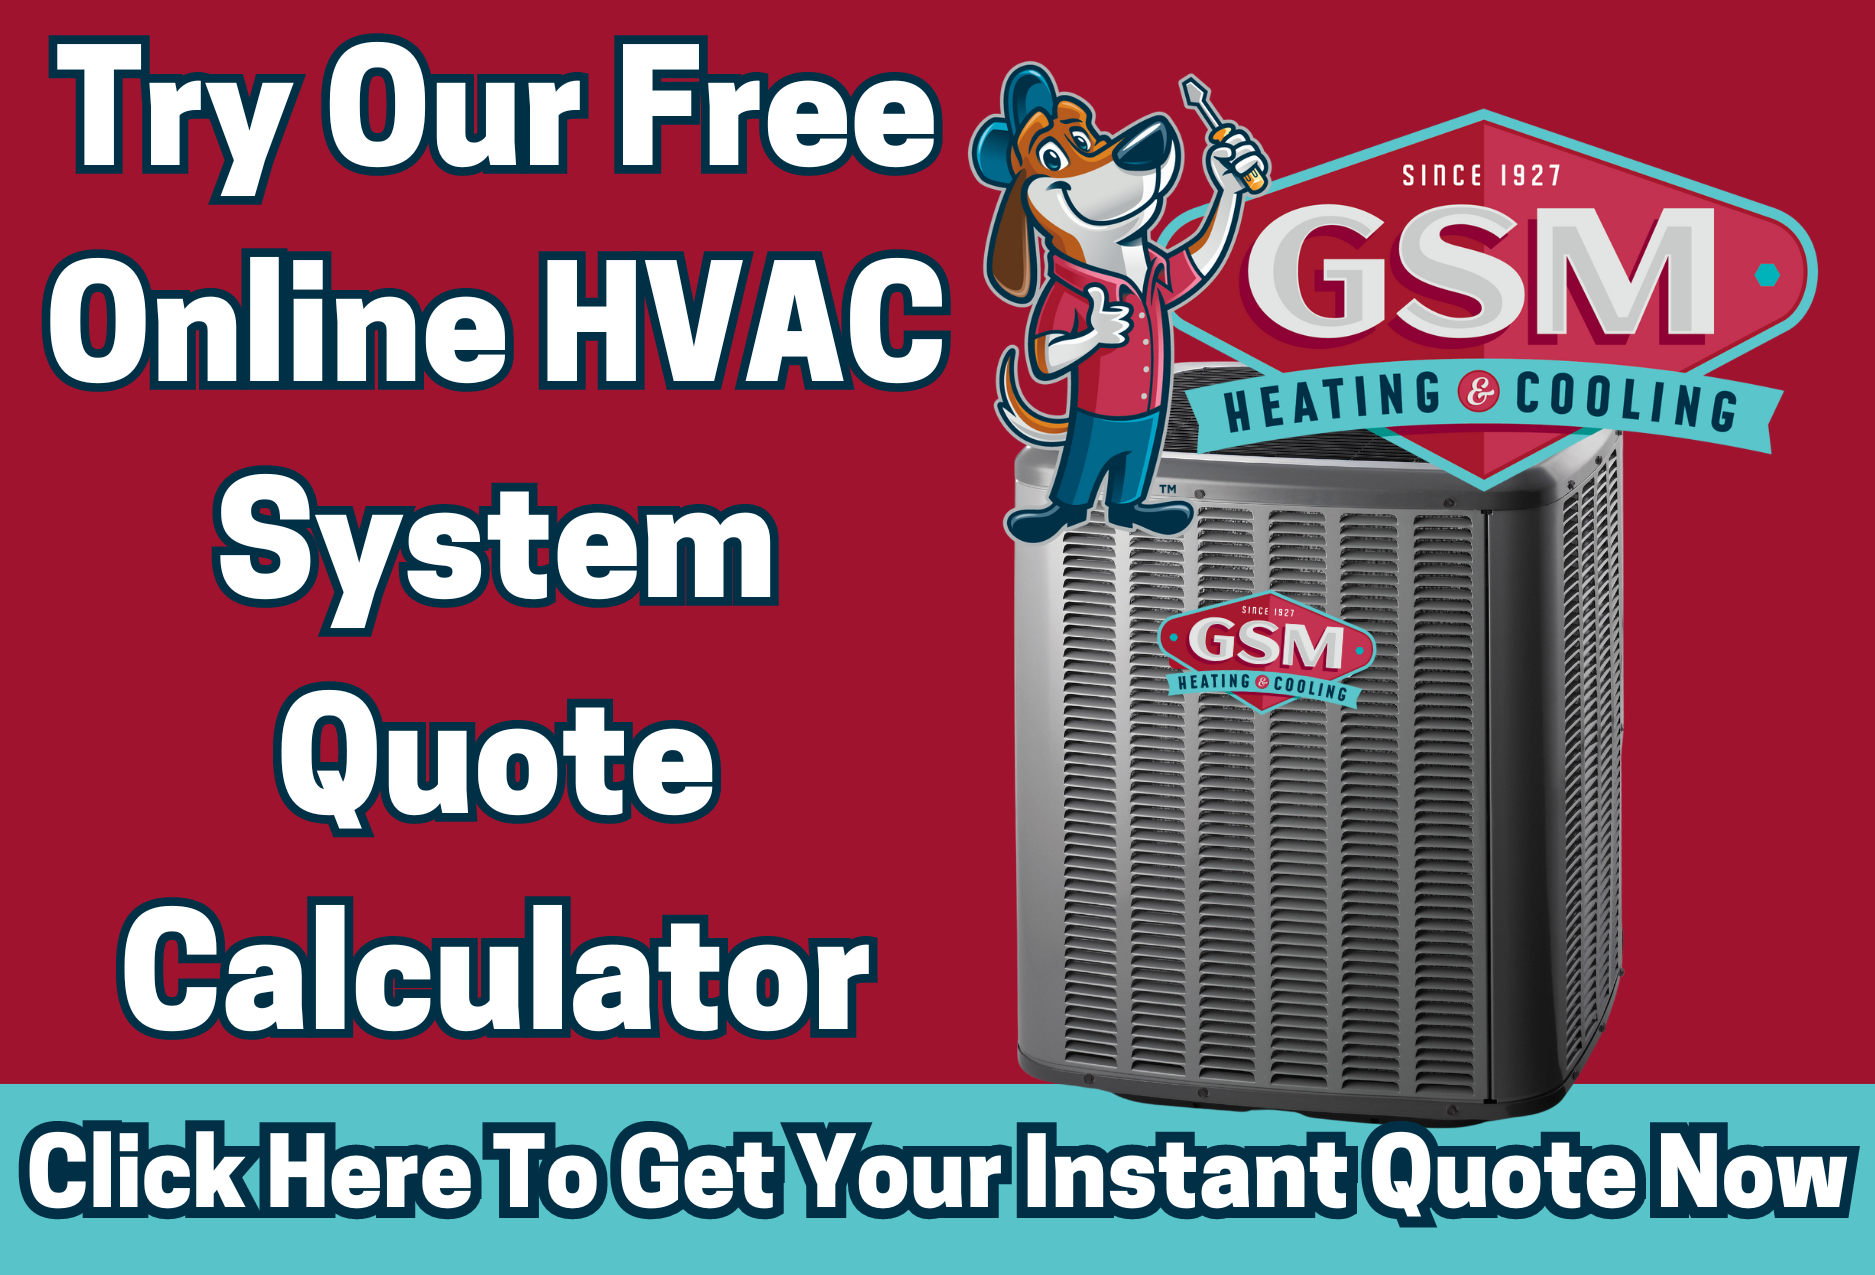 Cost of a New Heating & Cooling System